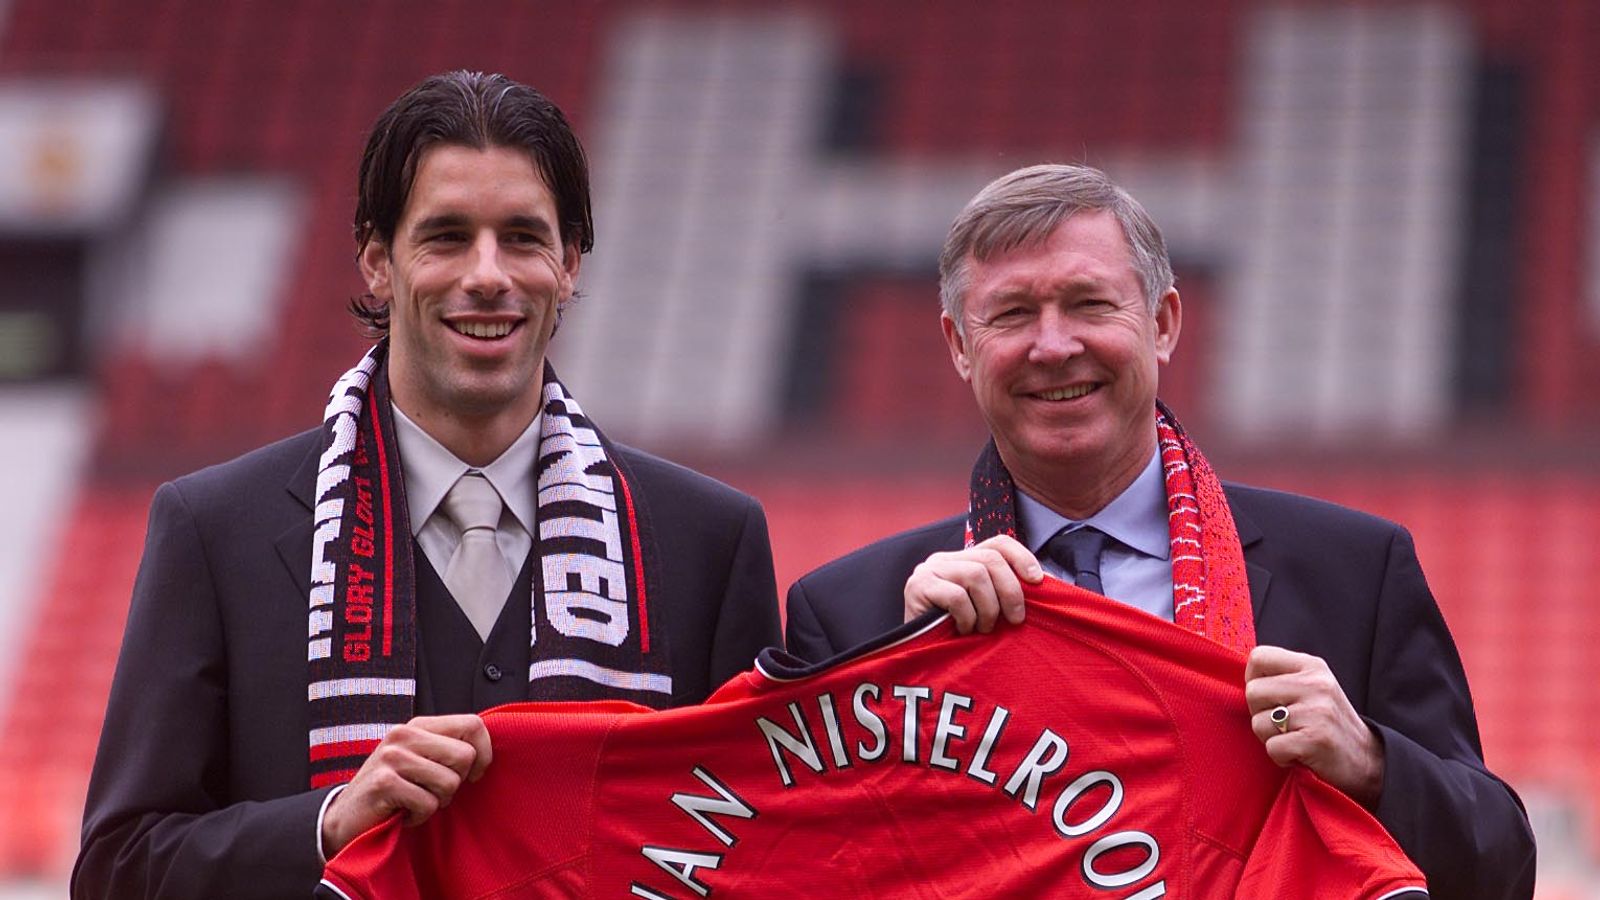 Ex-Real Madrid frontman van Nistelrooy lands first major coaching role